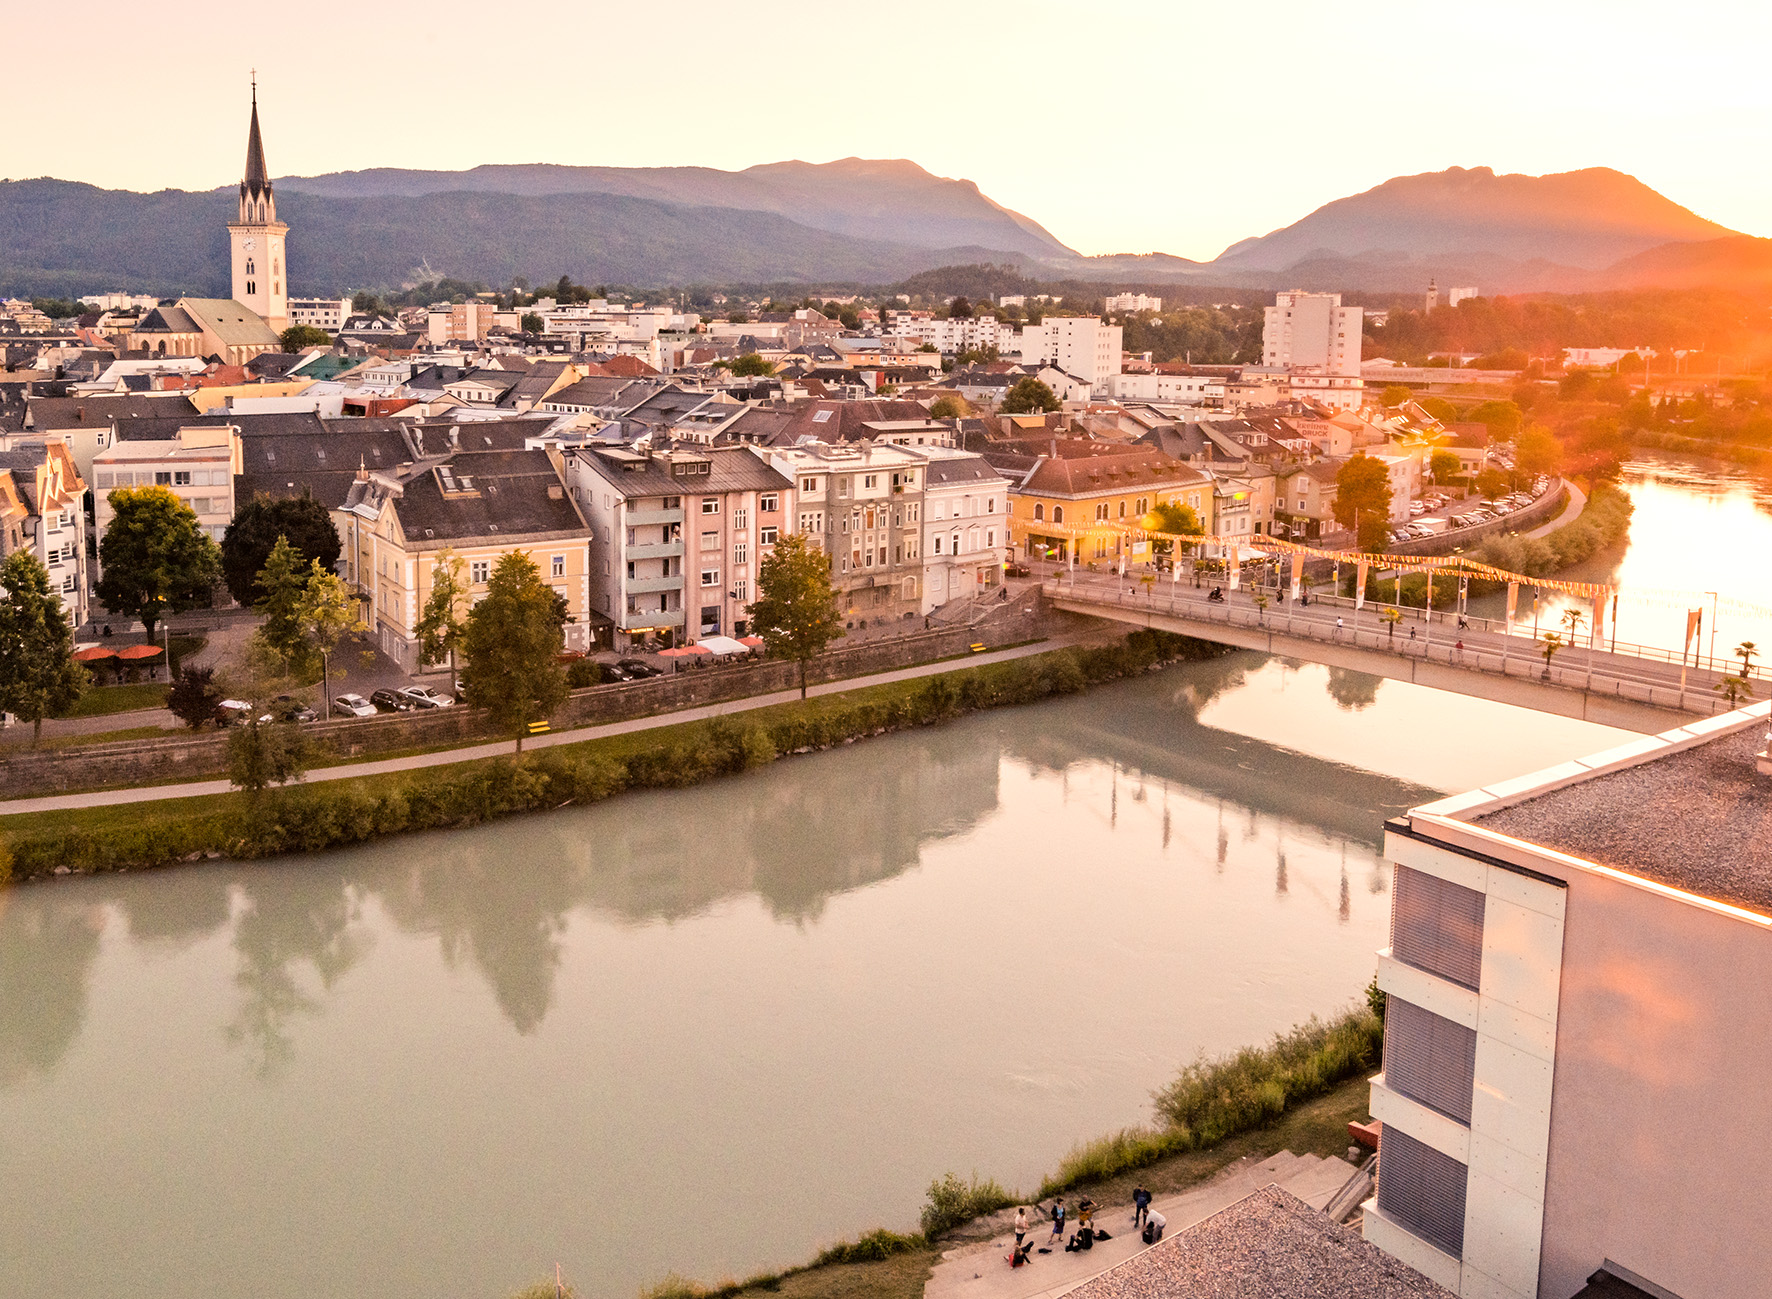 Villach - the lively town on the River Drau